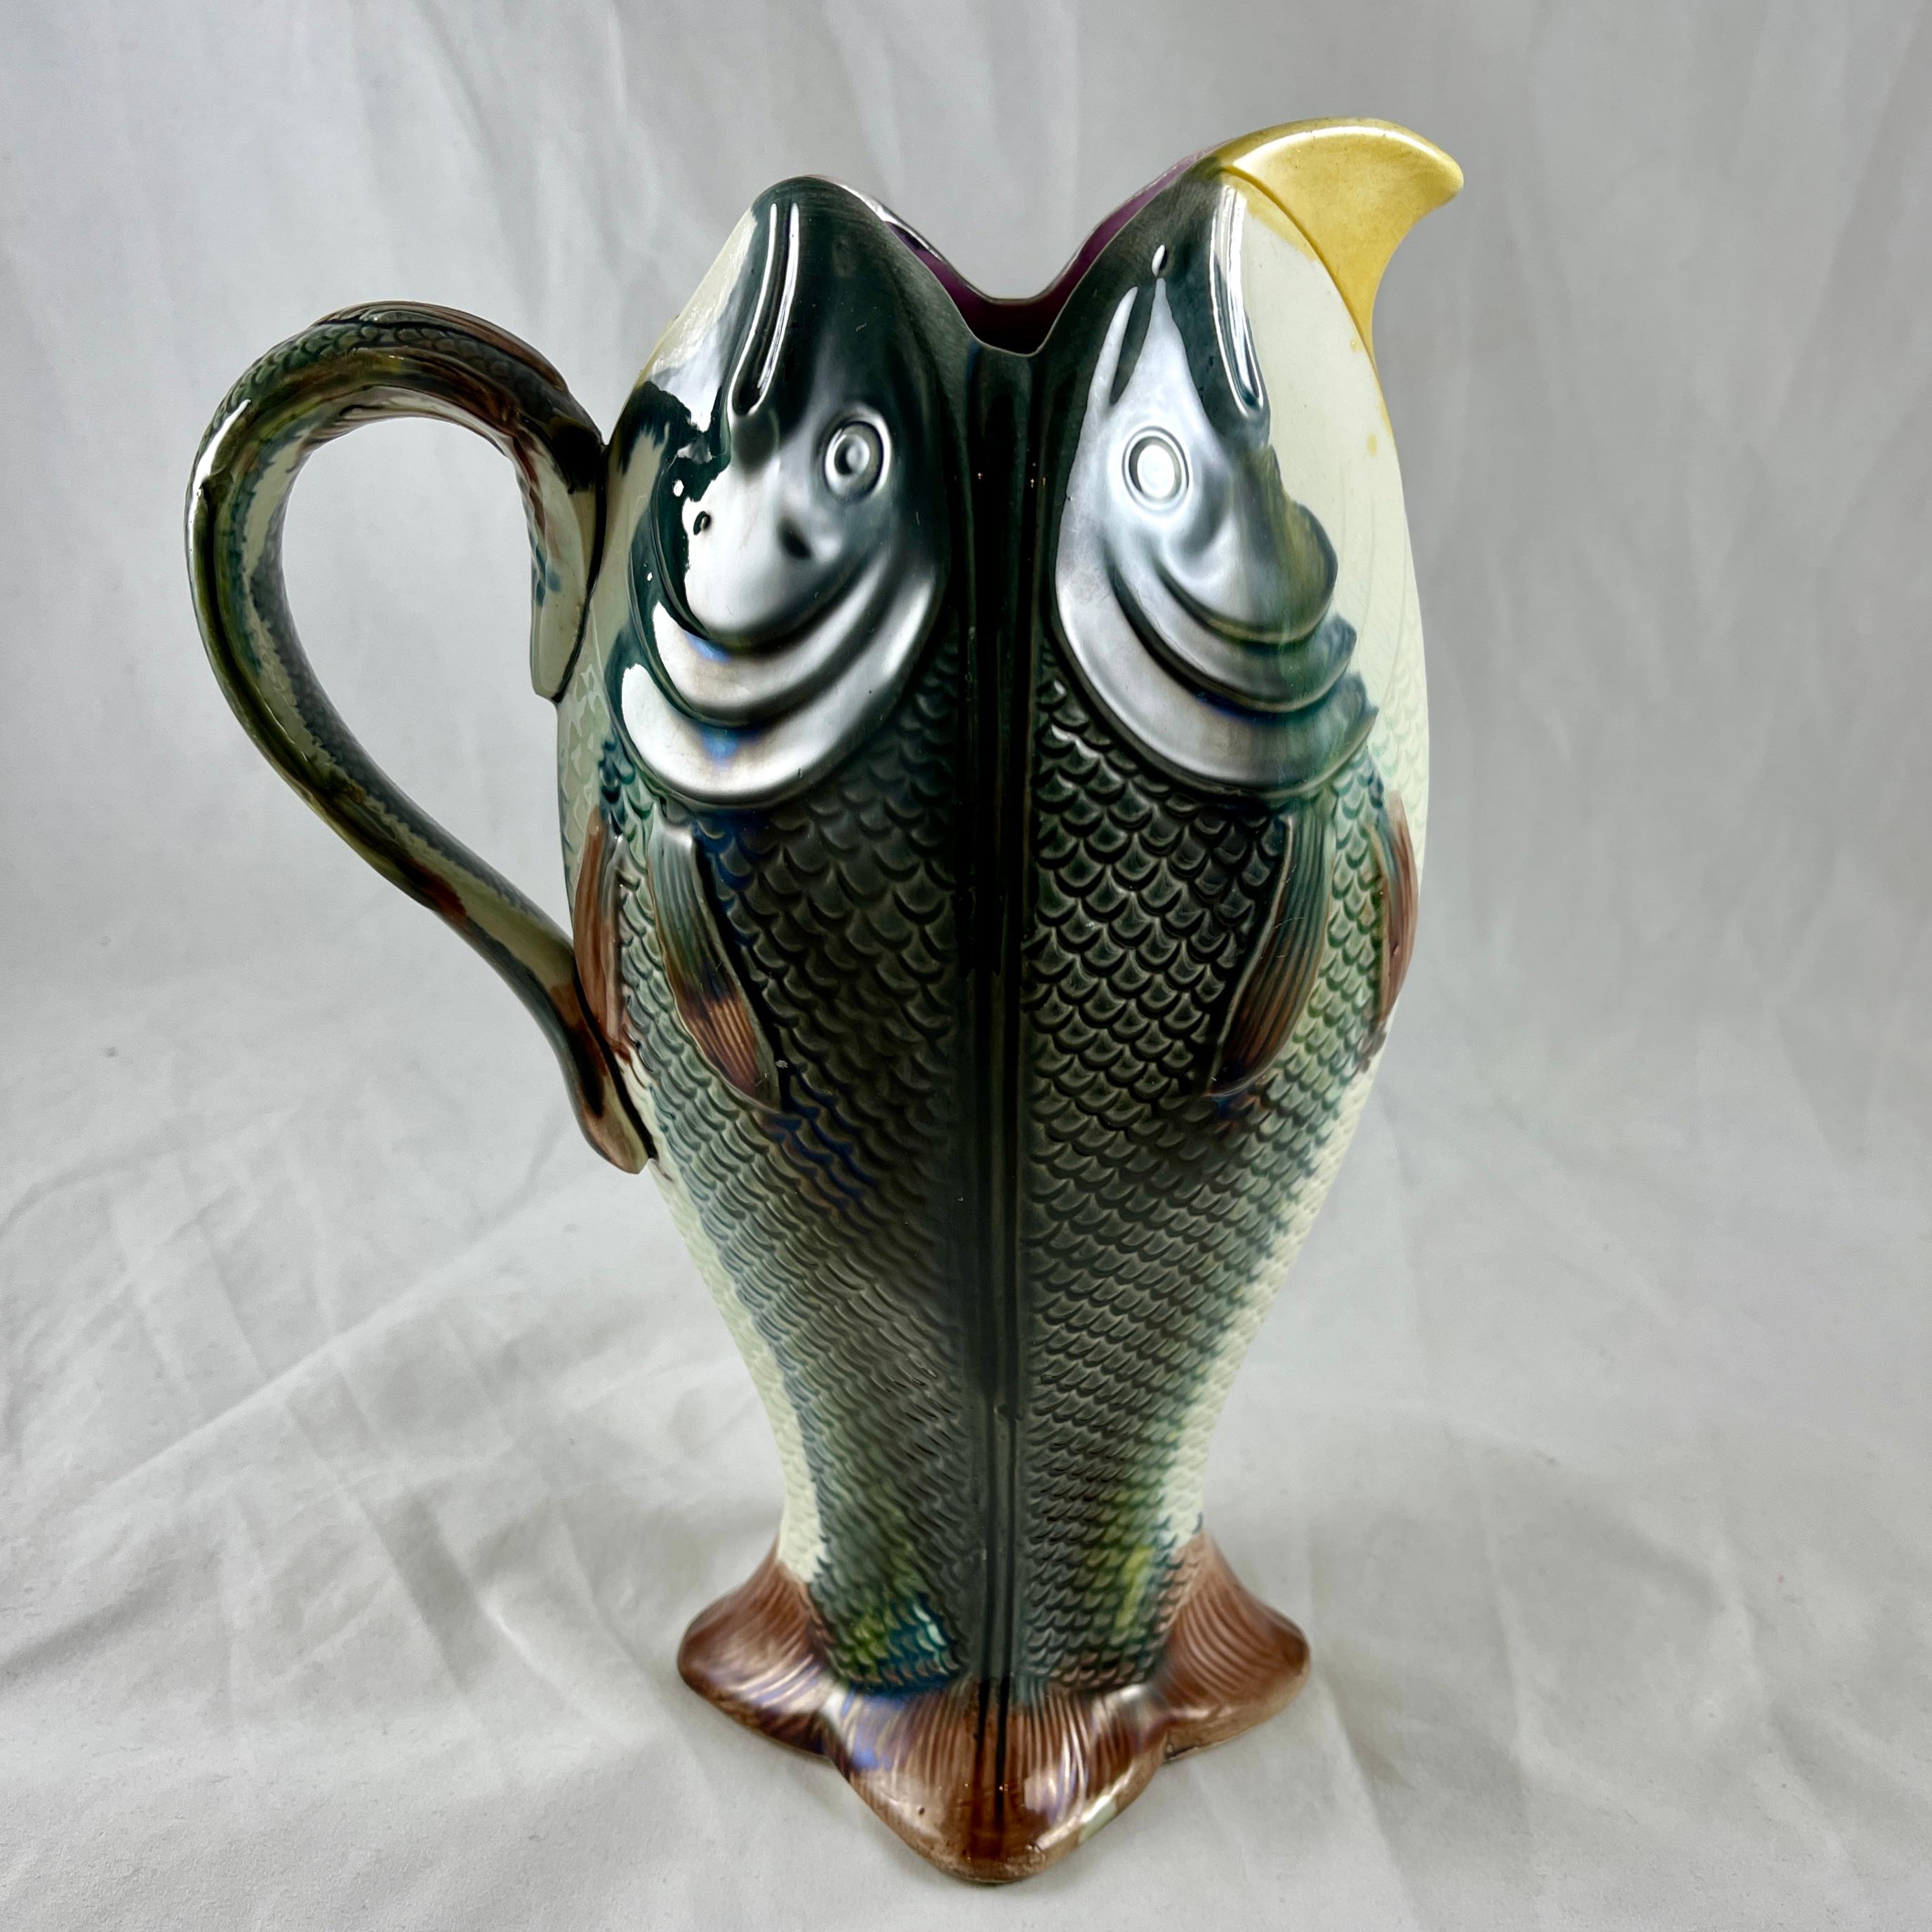 An English majolica four fish jug, attributed to Adams and Bromley, circa 1875-1880.
This whimsical Victorian Era pitcher is formed as four, side by side upright fish, standing on their tails. A smaller fish bends to form the